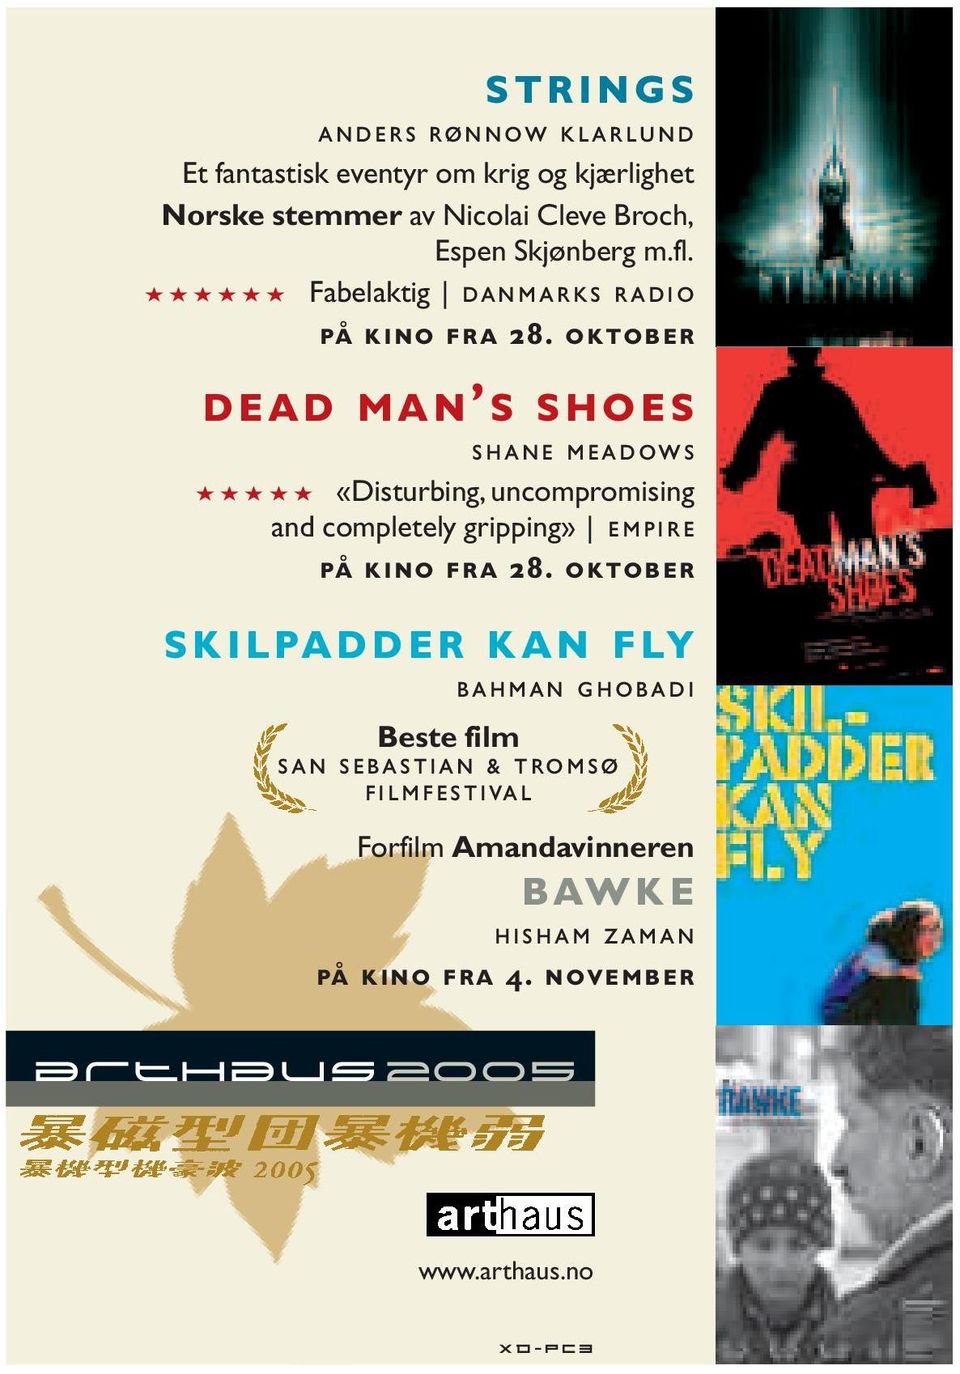 oktober dead man s shoes shane meadows DDDDD «Disturbing, uncompromising and completely gripping» empire på kino fra 28.